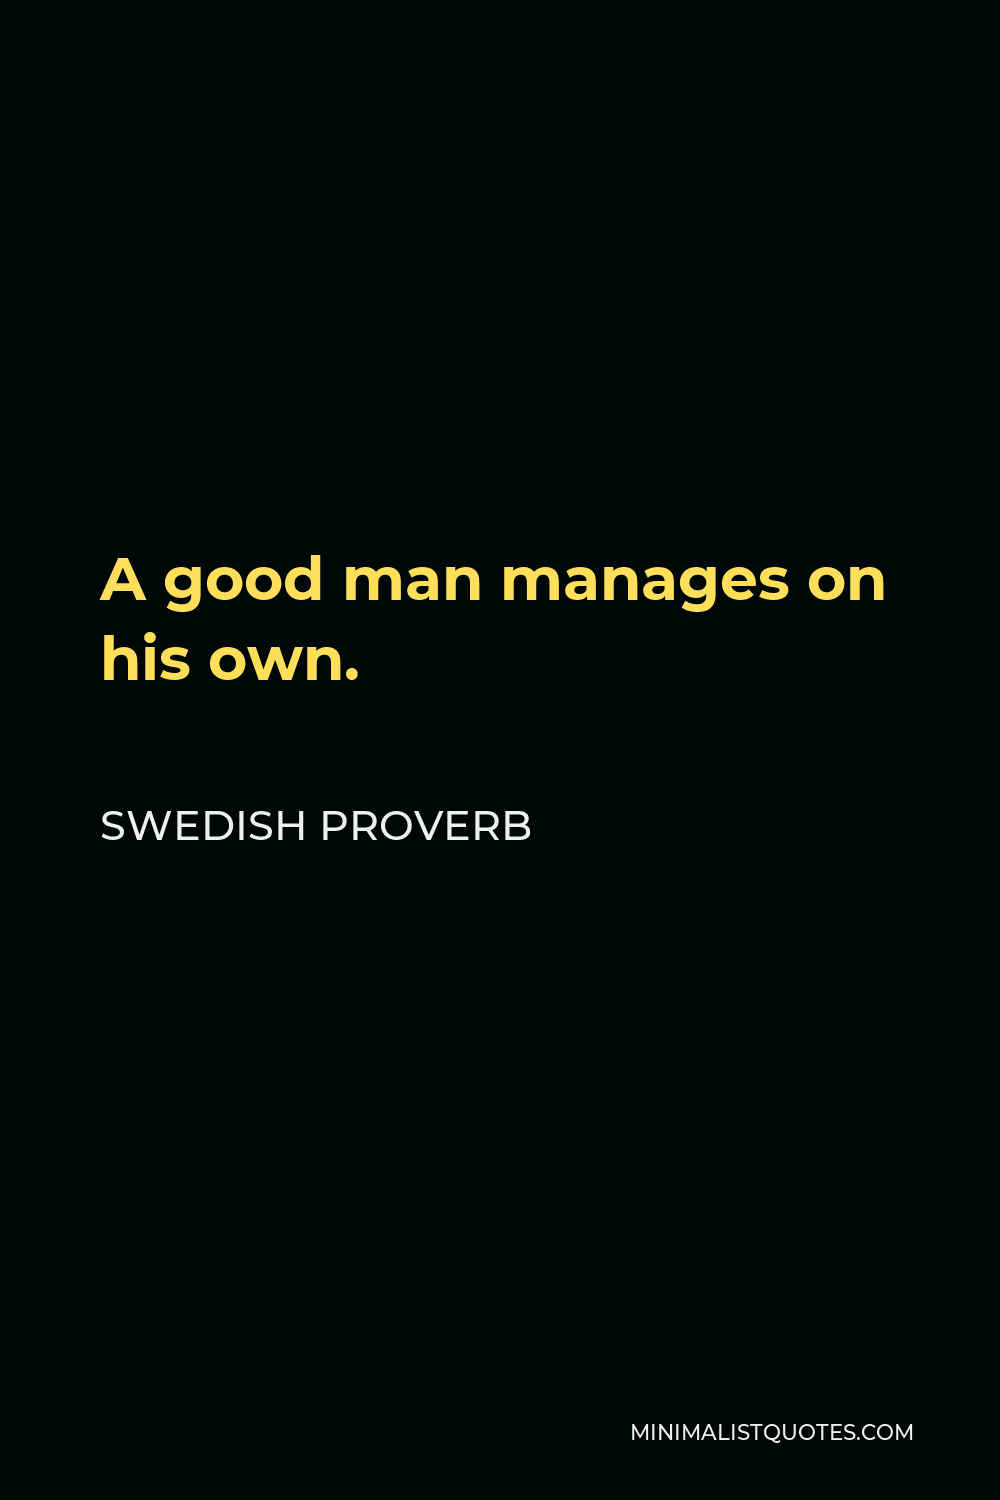 Swedish Proverb Quote - A good man manages on his own.